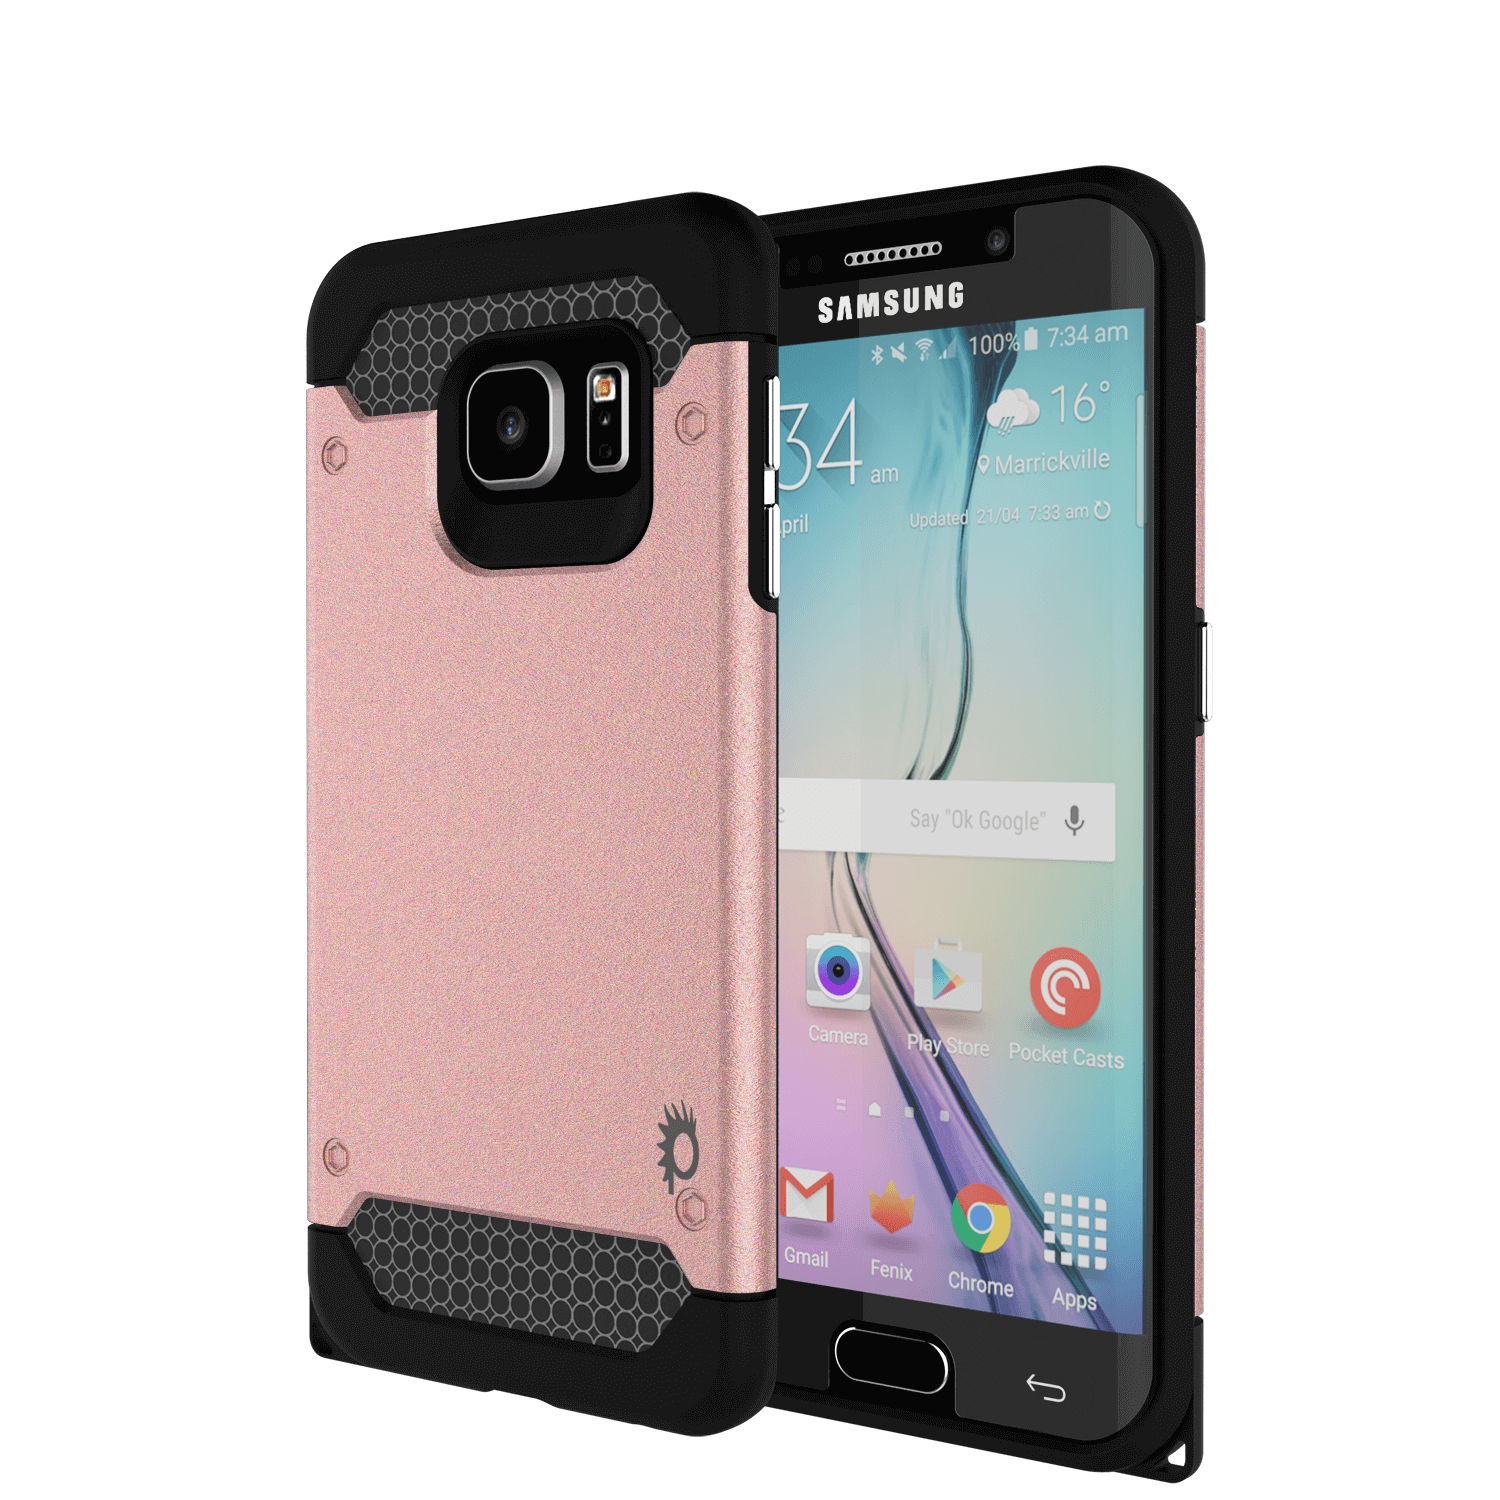 Galaxy s6 EDGE Plus Case PunkCase Galactic Rose Gold Slim Armor Soft Cover w/ Screen Protector